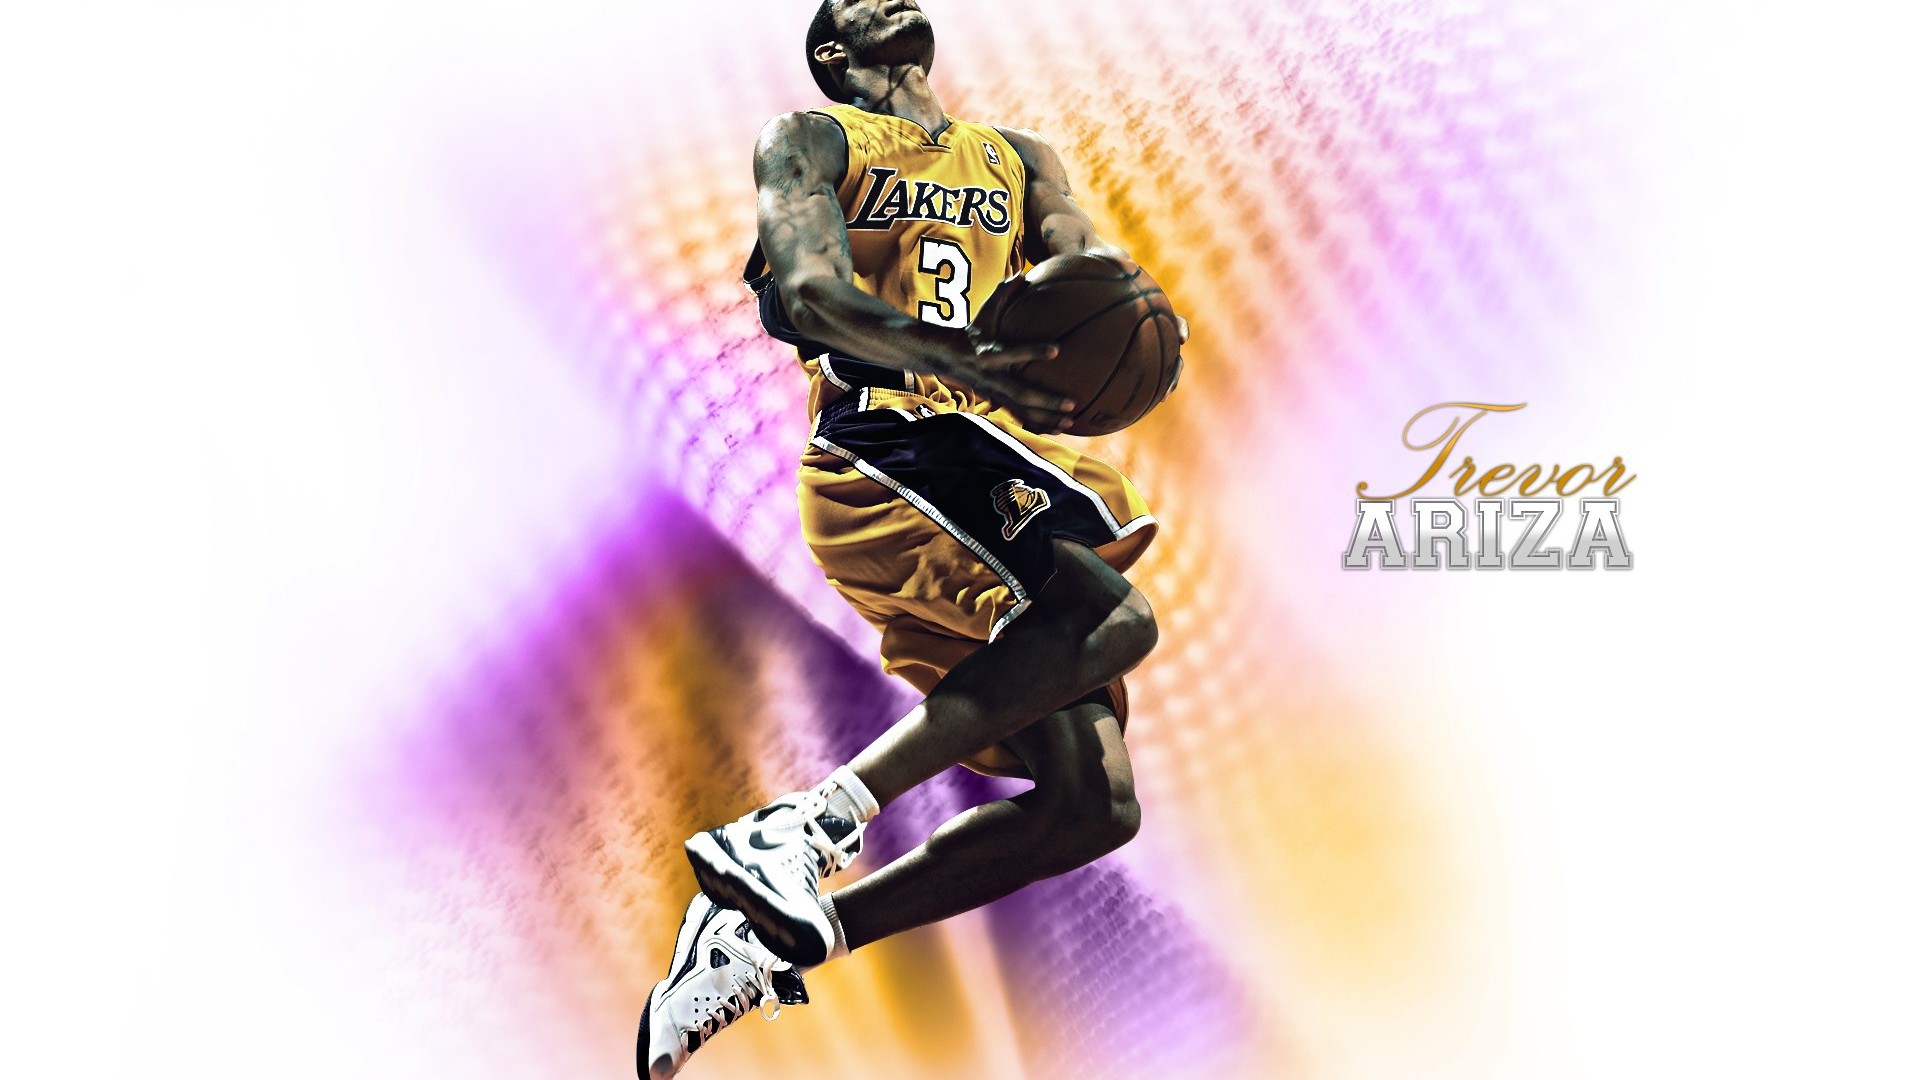 Los Angeles Lakers Official Wallpaper #27 - 1920x1080